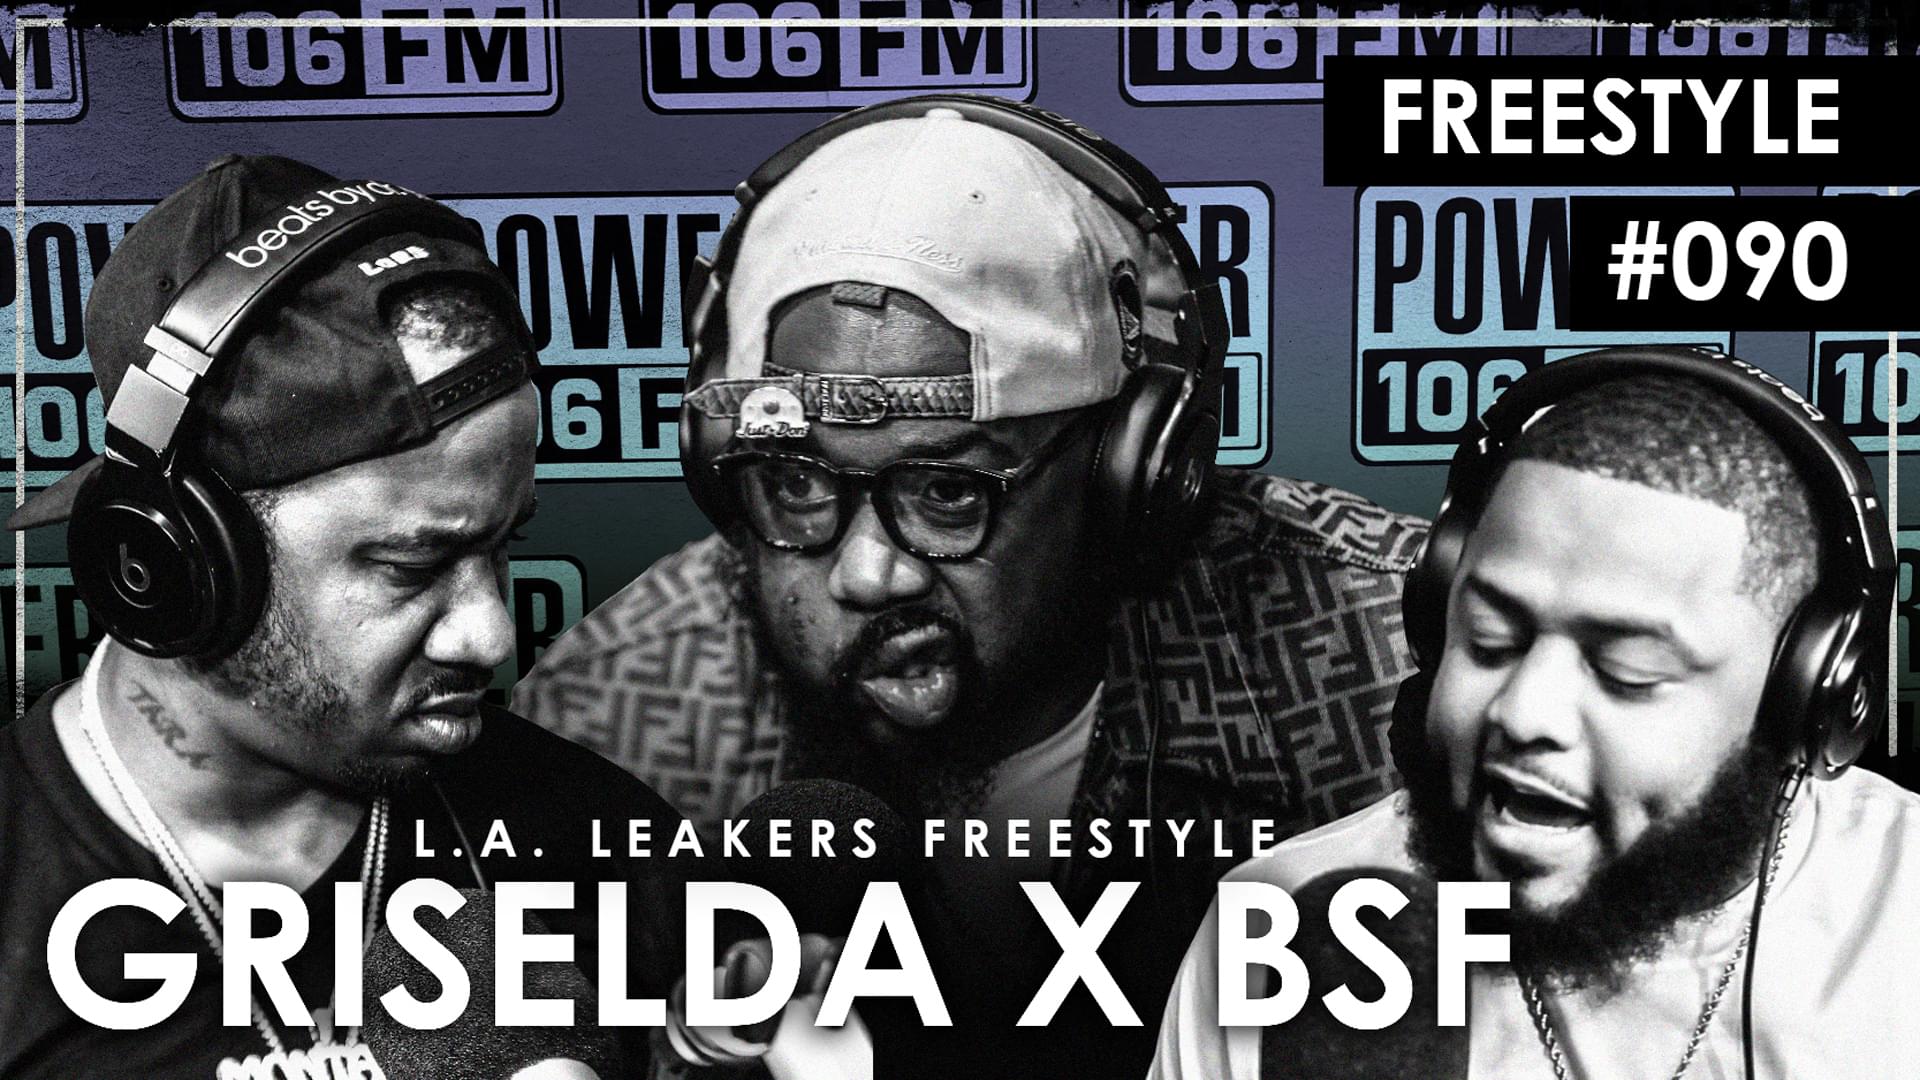 Griselda & BSF Freestyle w/ The L.A. Leakers – Freestyle #090